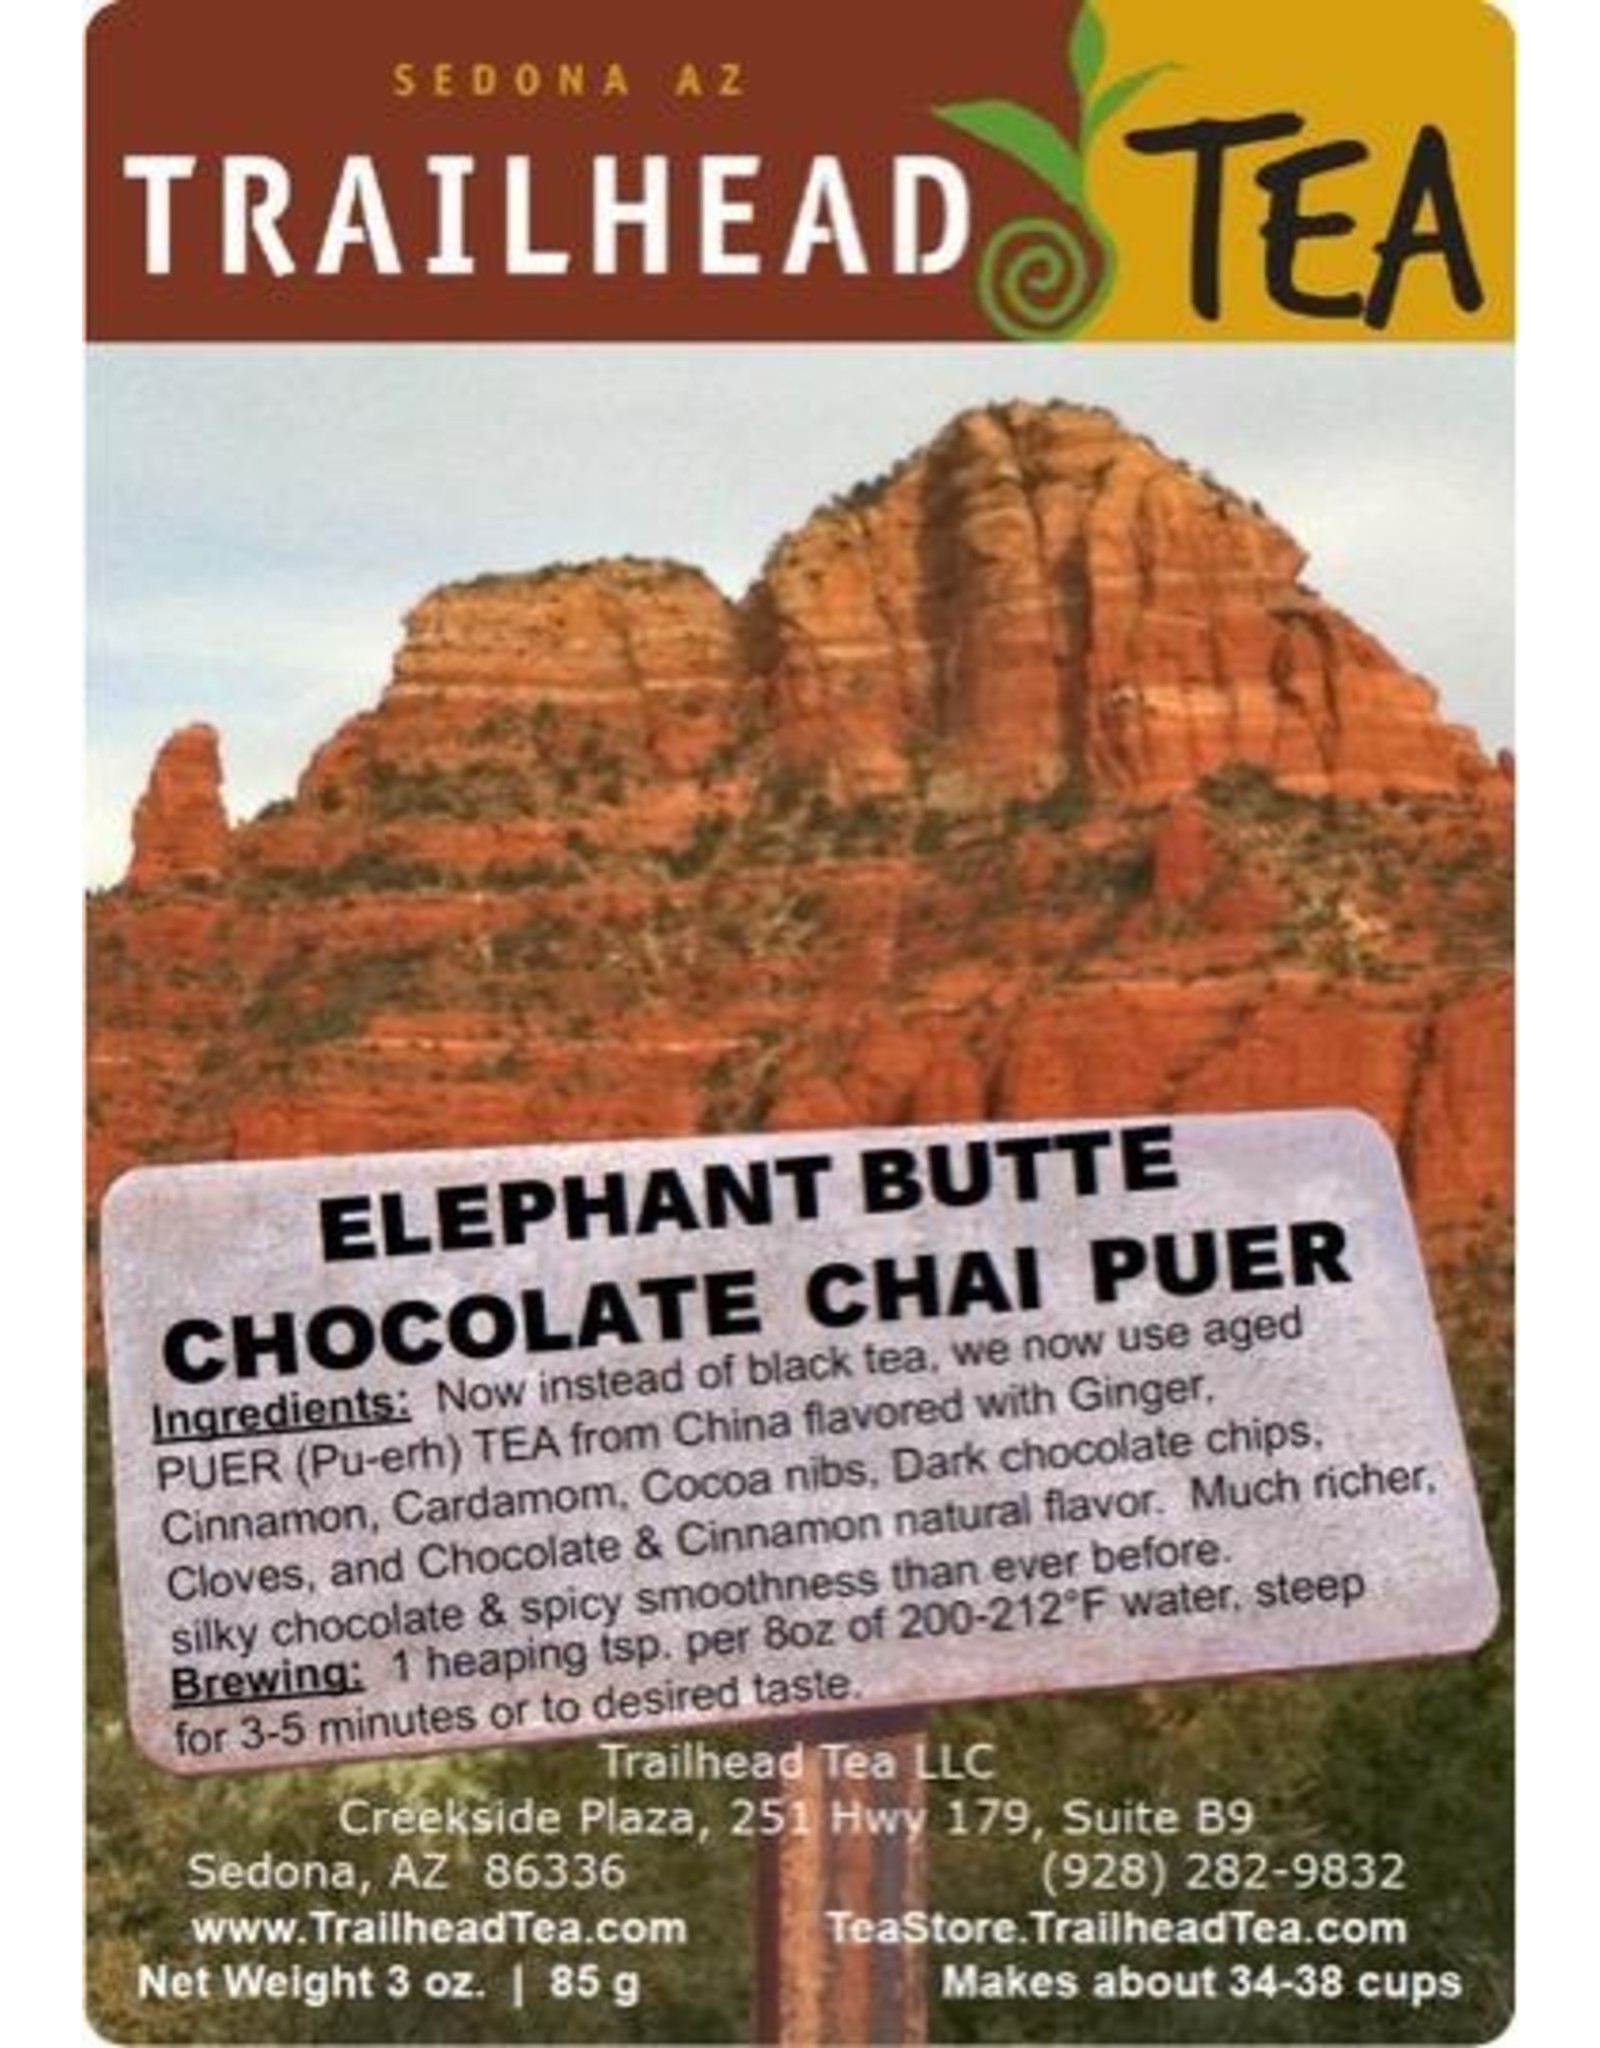 Tea from China Elephant Butte Chocolate Chai Puer